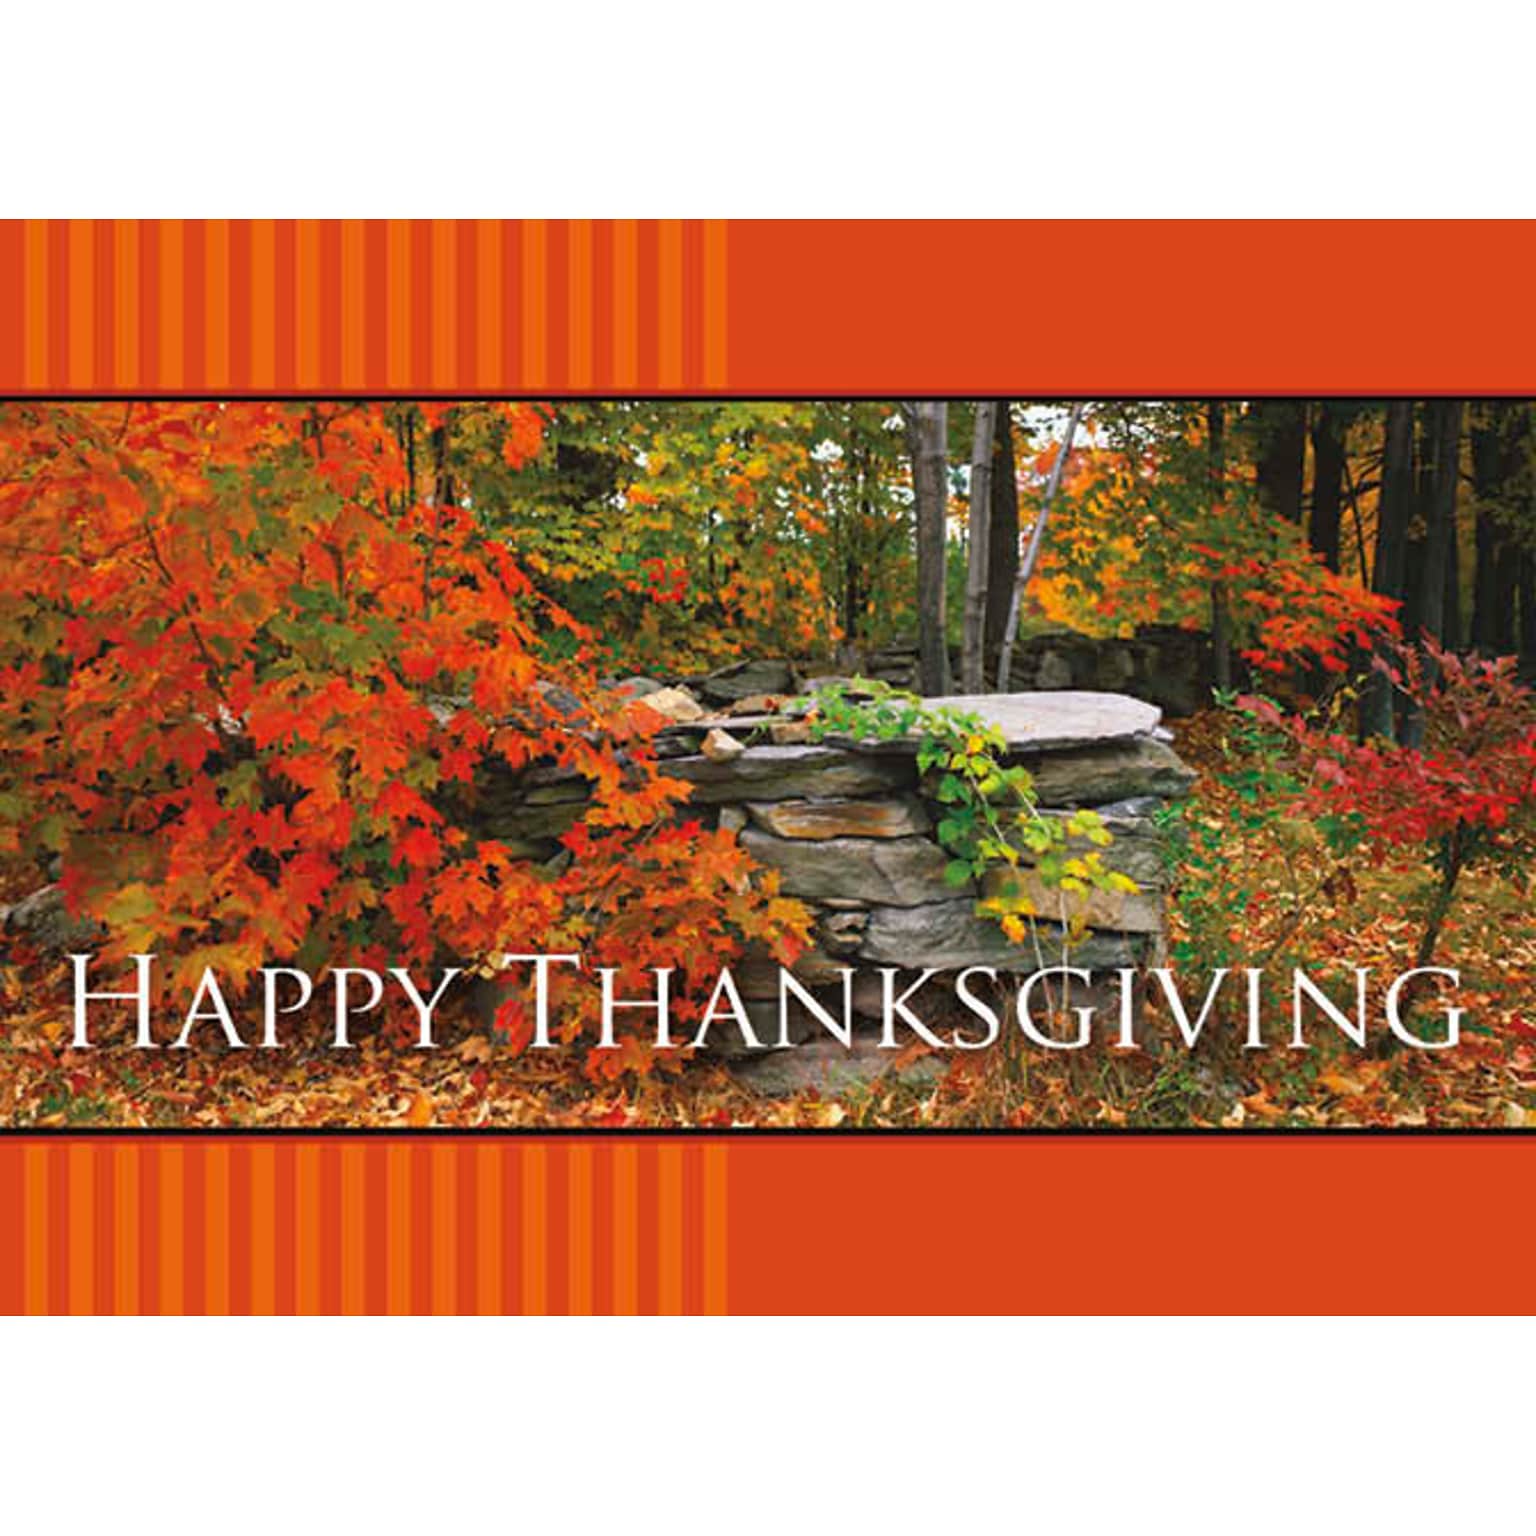 Happy Thanksgiving Scenic Woods In Autumn Seasonal Greeting Cards, With A7 Envelopes, 7 x 5, 25 Cards per Set